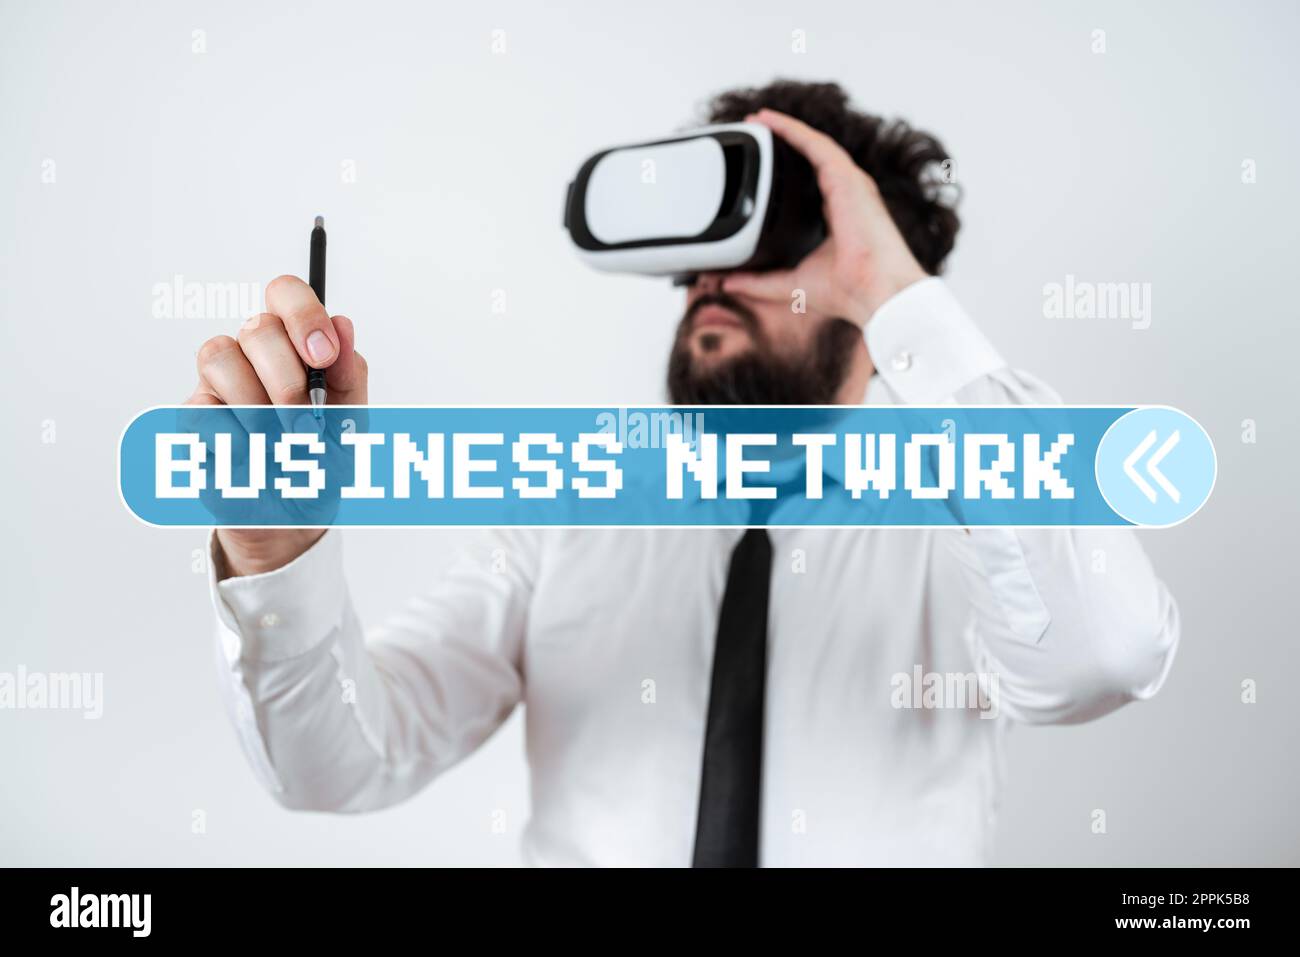 Sign displaying Business Network. Business showcase Interfirm cooperation that allows companies to collaborate Stock Photo